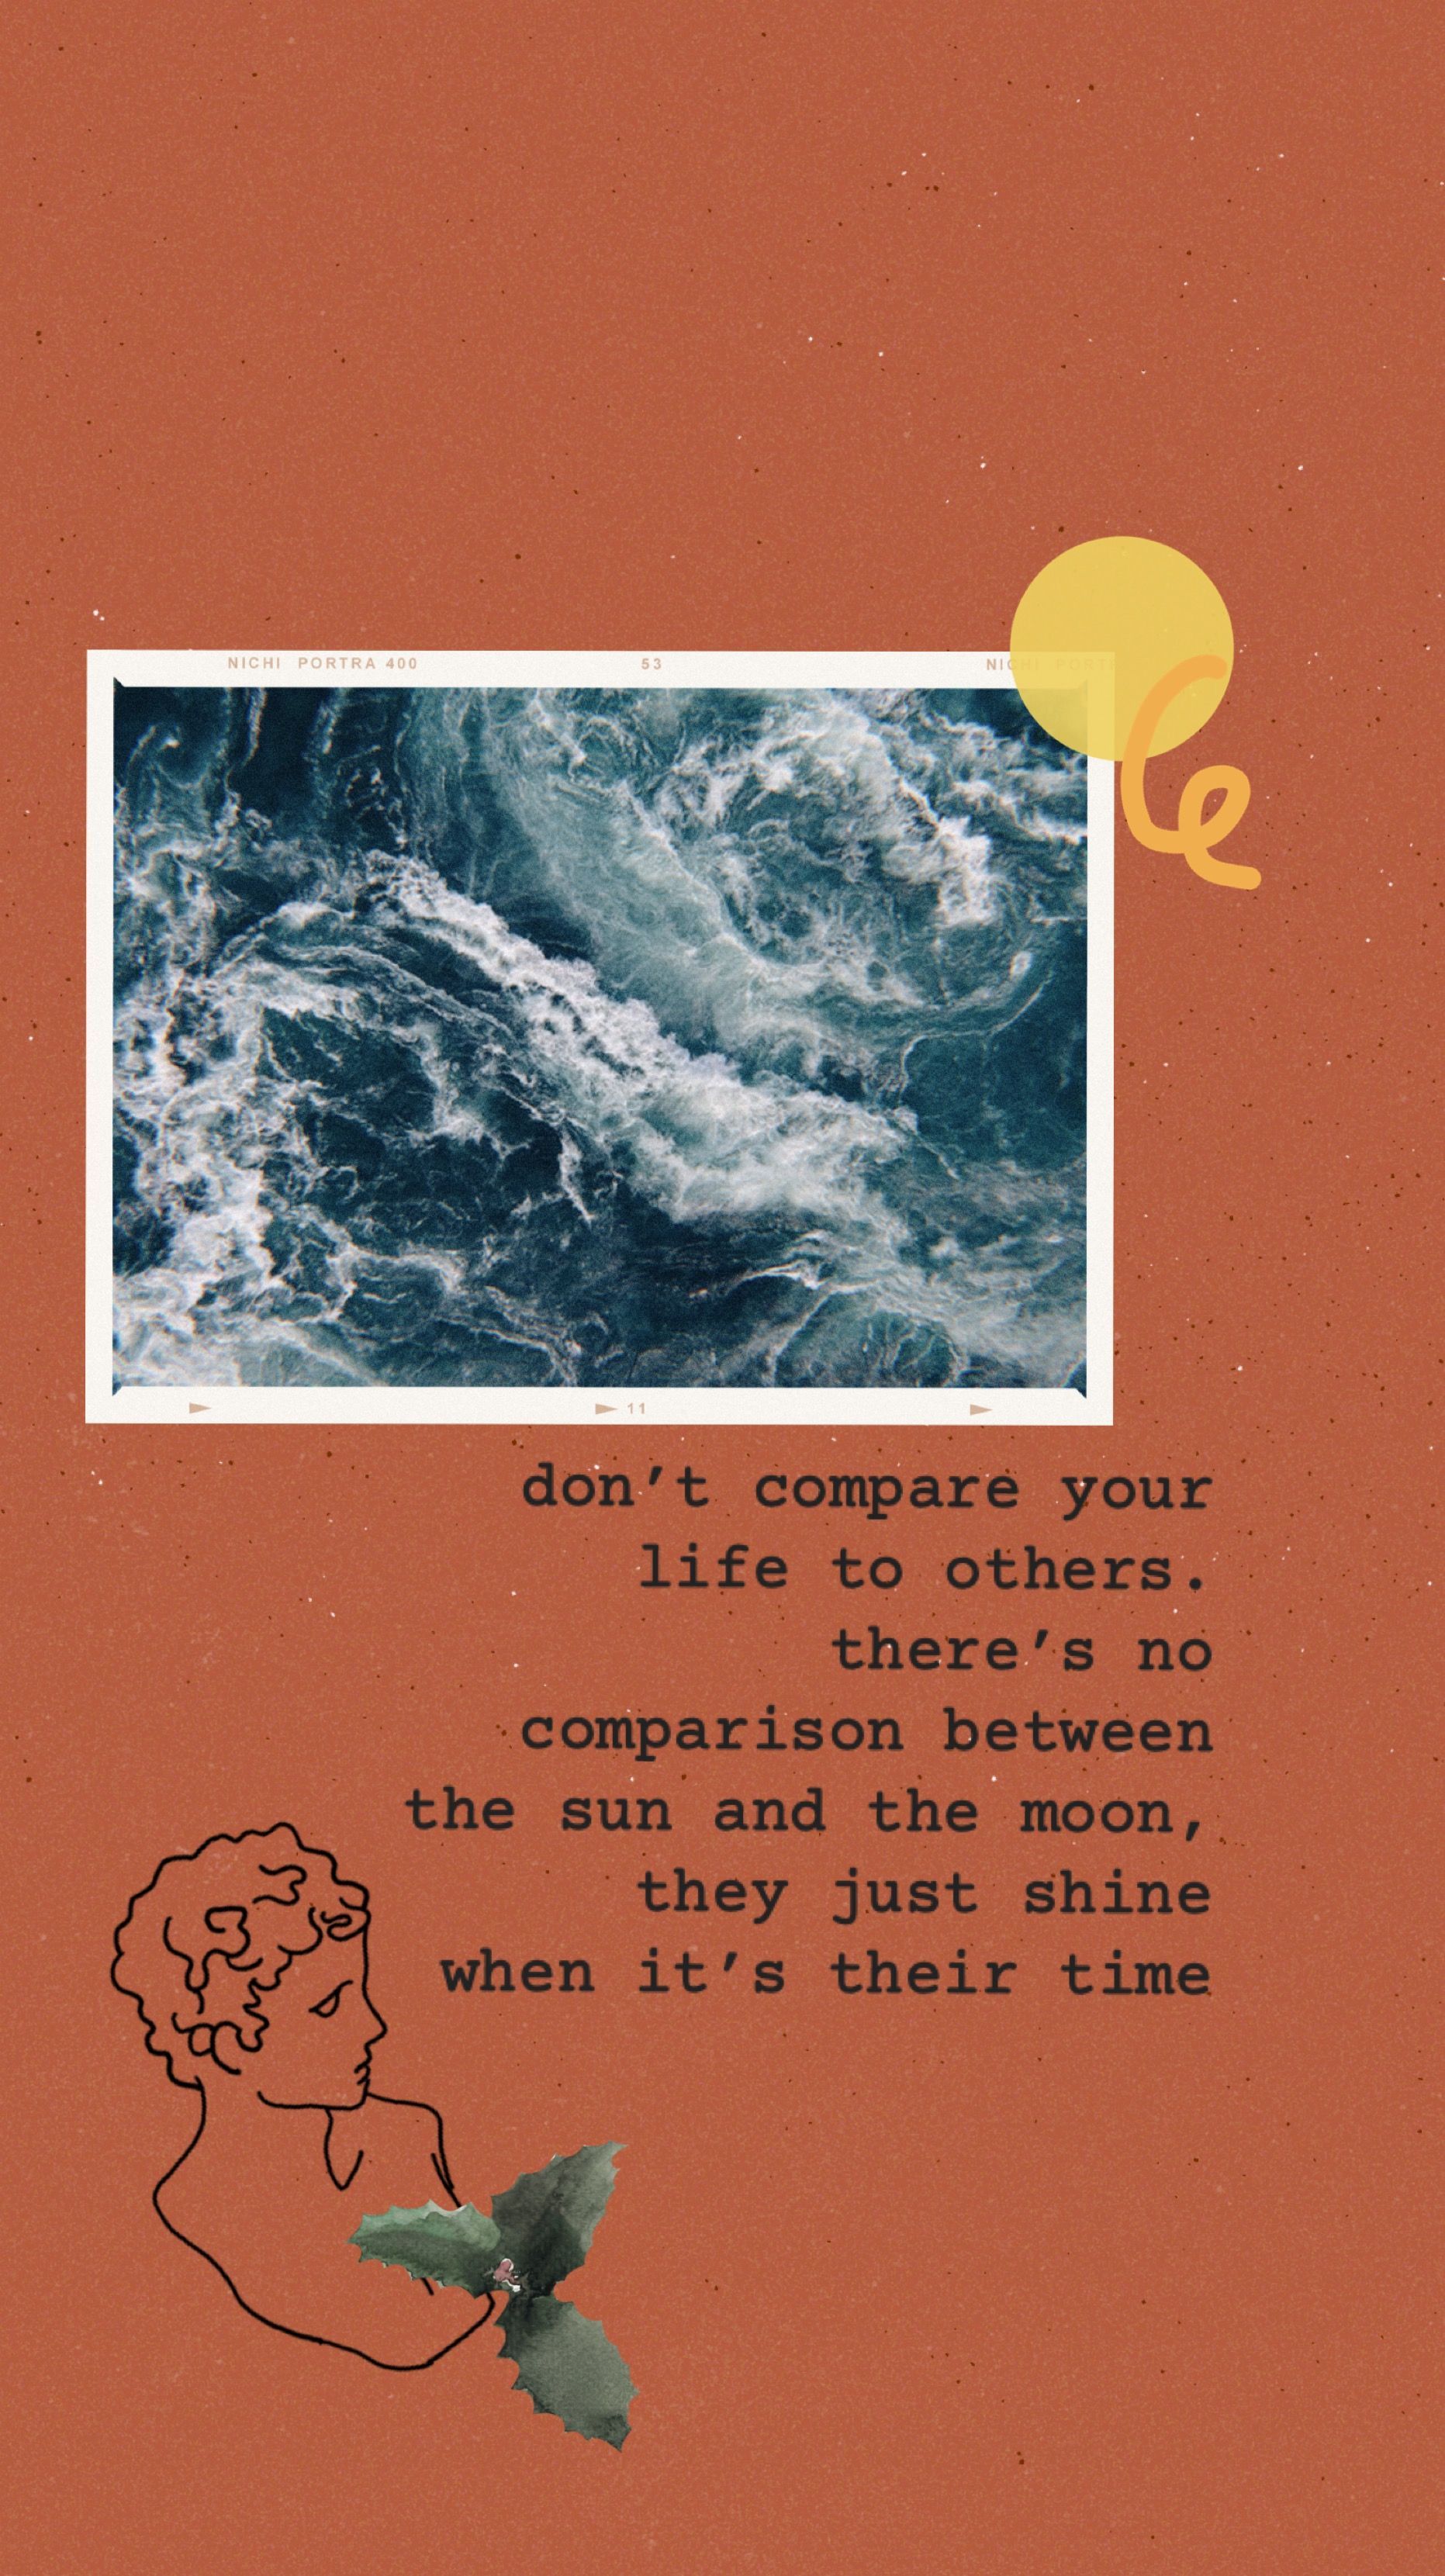 Comparison quote iphone wallpaper. fits iphone xr!. Positive wallpaper, Wallpaper iphone quotes, Aesthetic iphone wallpaper